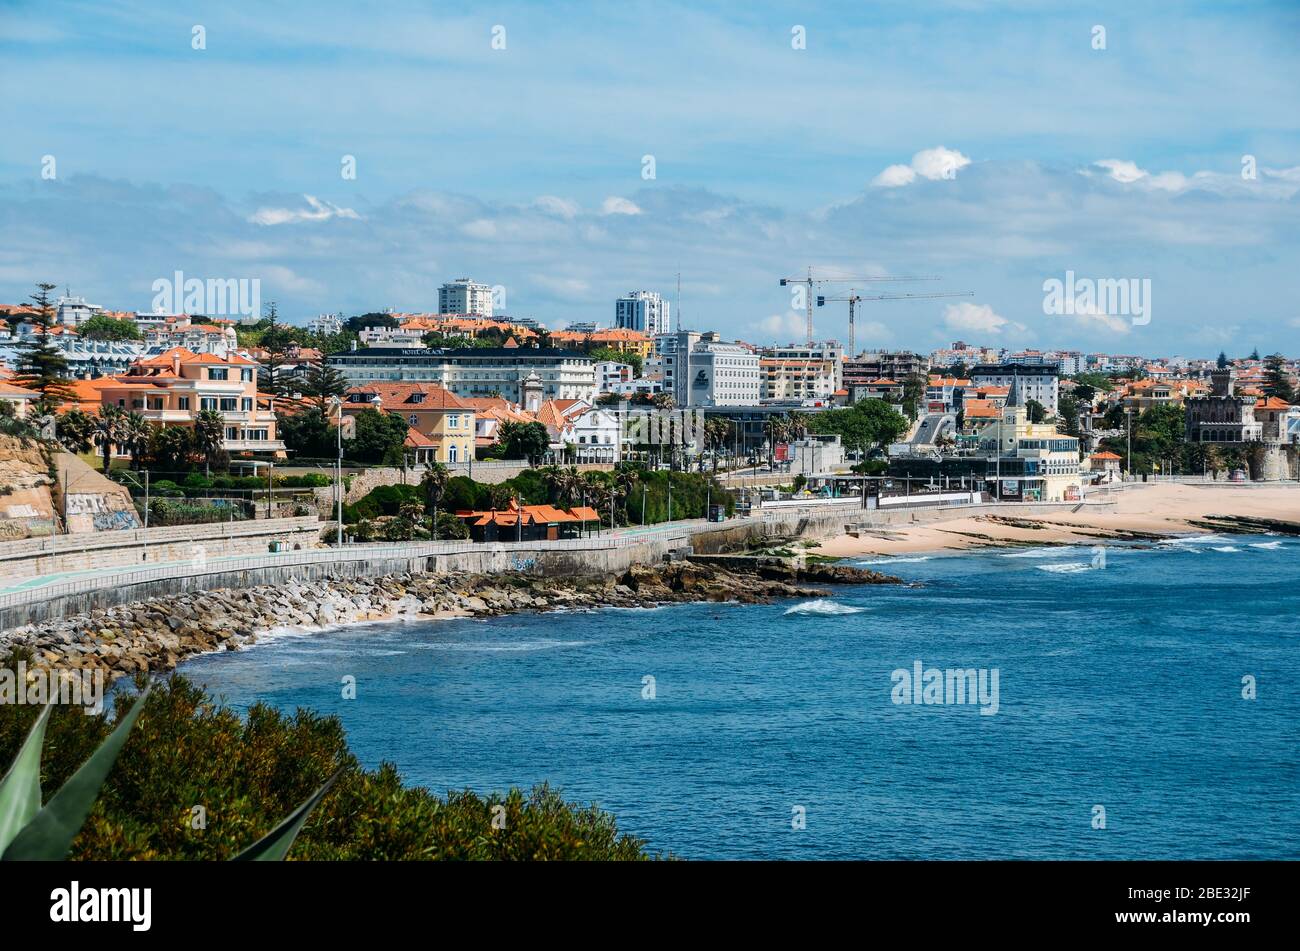 High perspective view of Estoril on the Costa Verde in Portugal Stock Photo